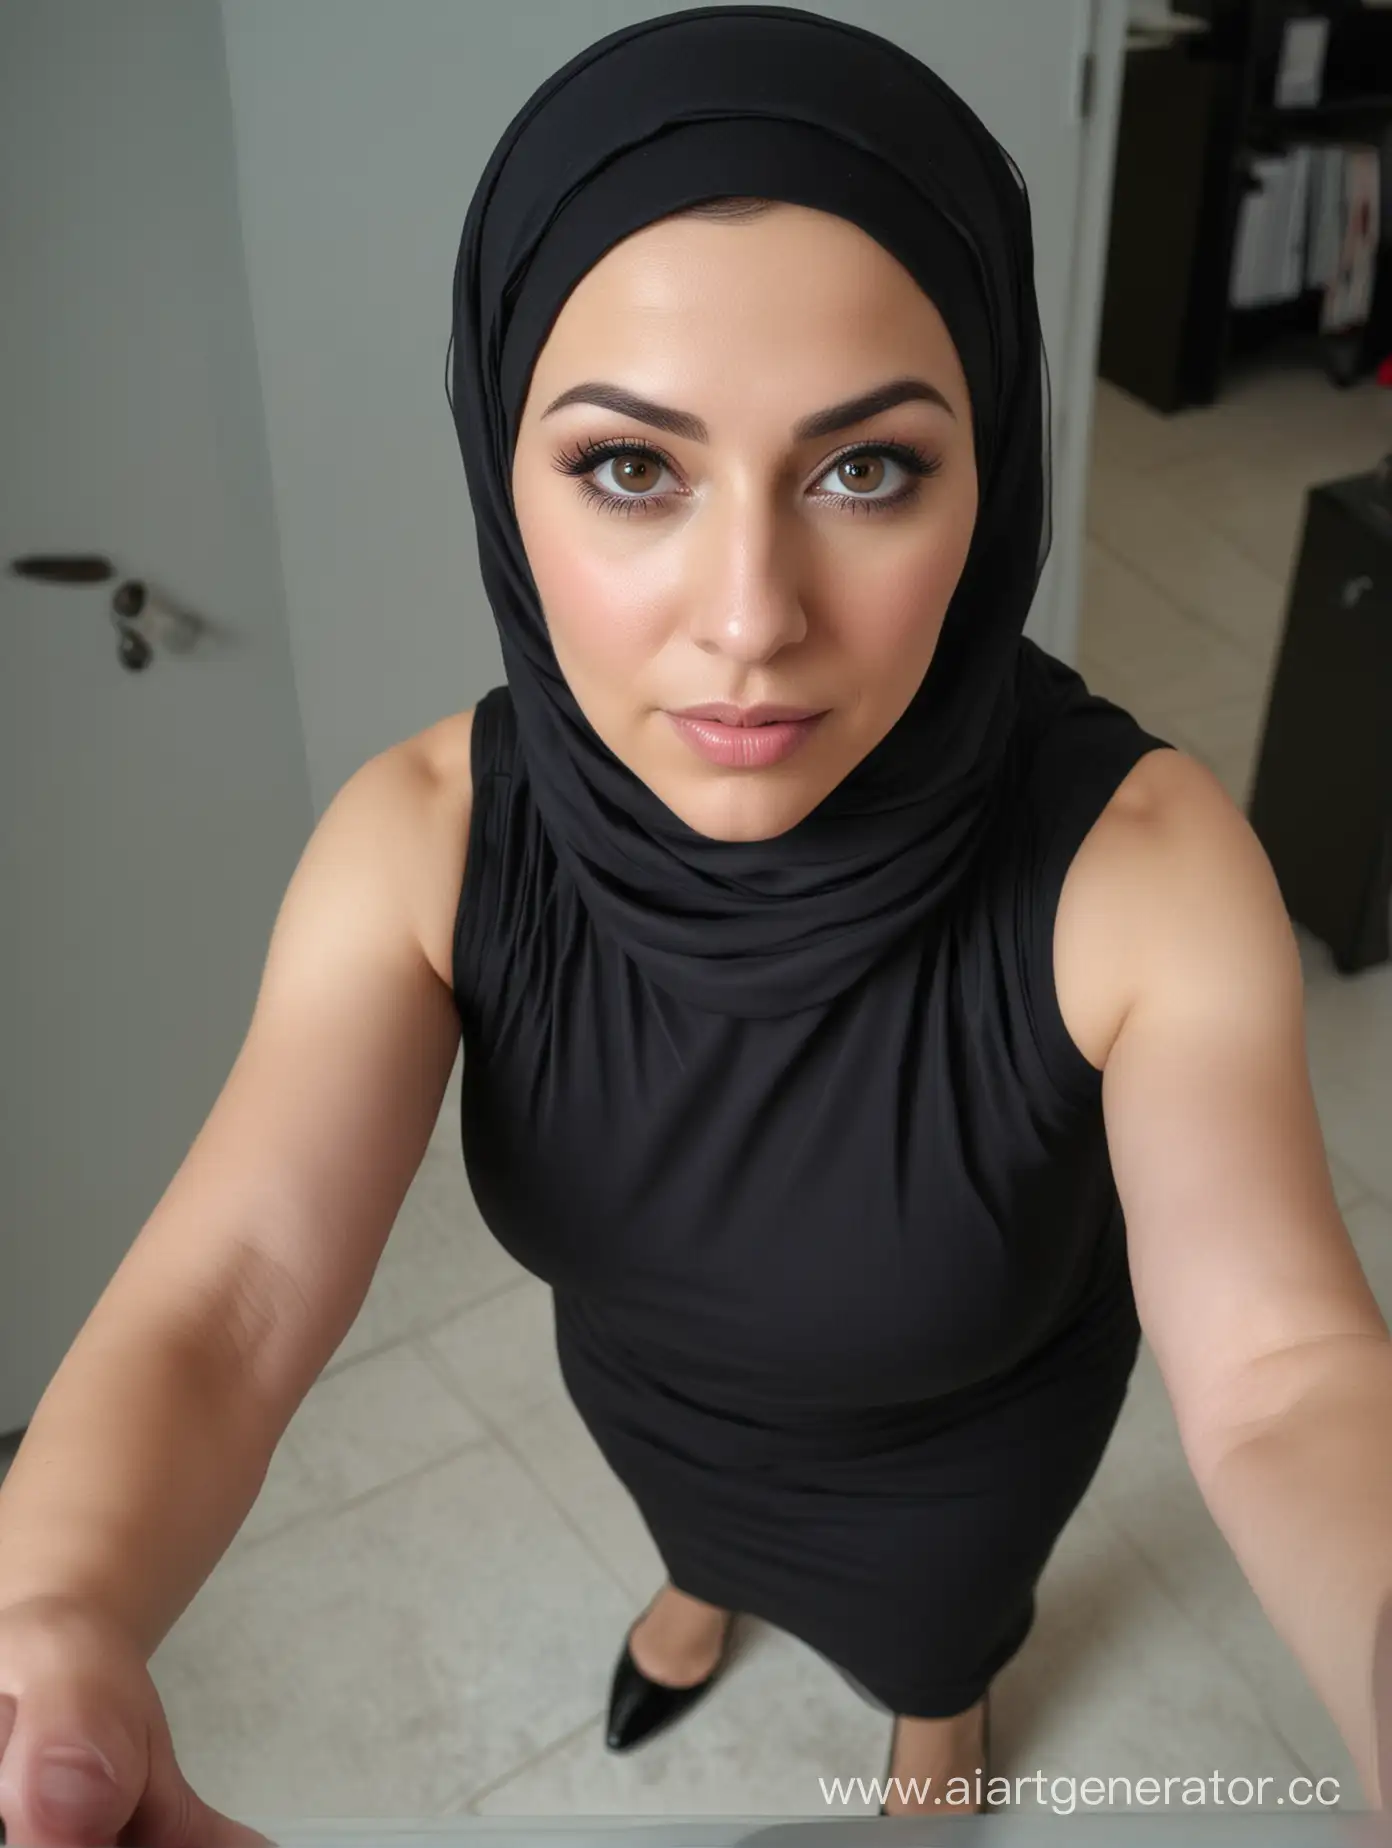 A dwarf woman. 45 years old. She wears a hijab, below knee dress, dark pantyhose, high heels. Office. Make up. Plump body. Curvy body. Kurdish. Her height is 130cm. Close pov shot. Close up. From above. She works on the computer. She has different face. She has small face. Visible nipples.